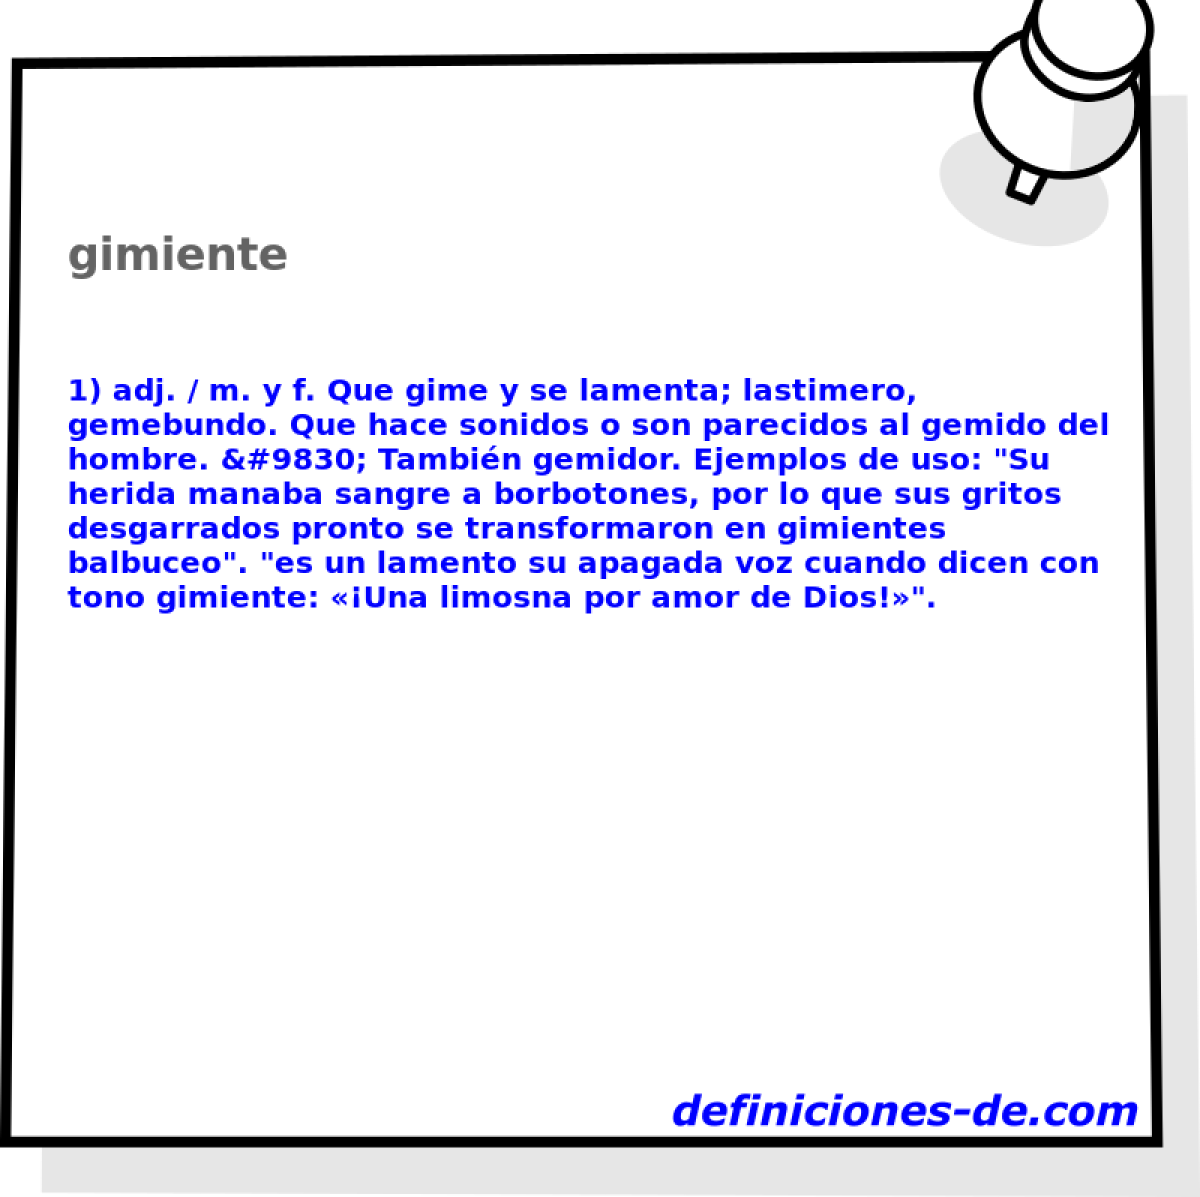 gimiente 